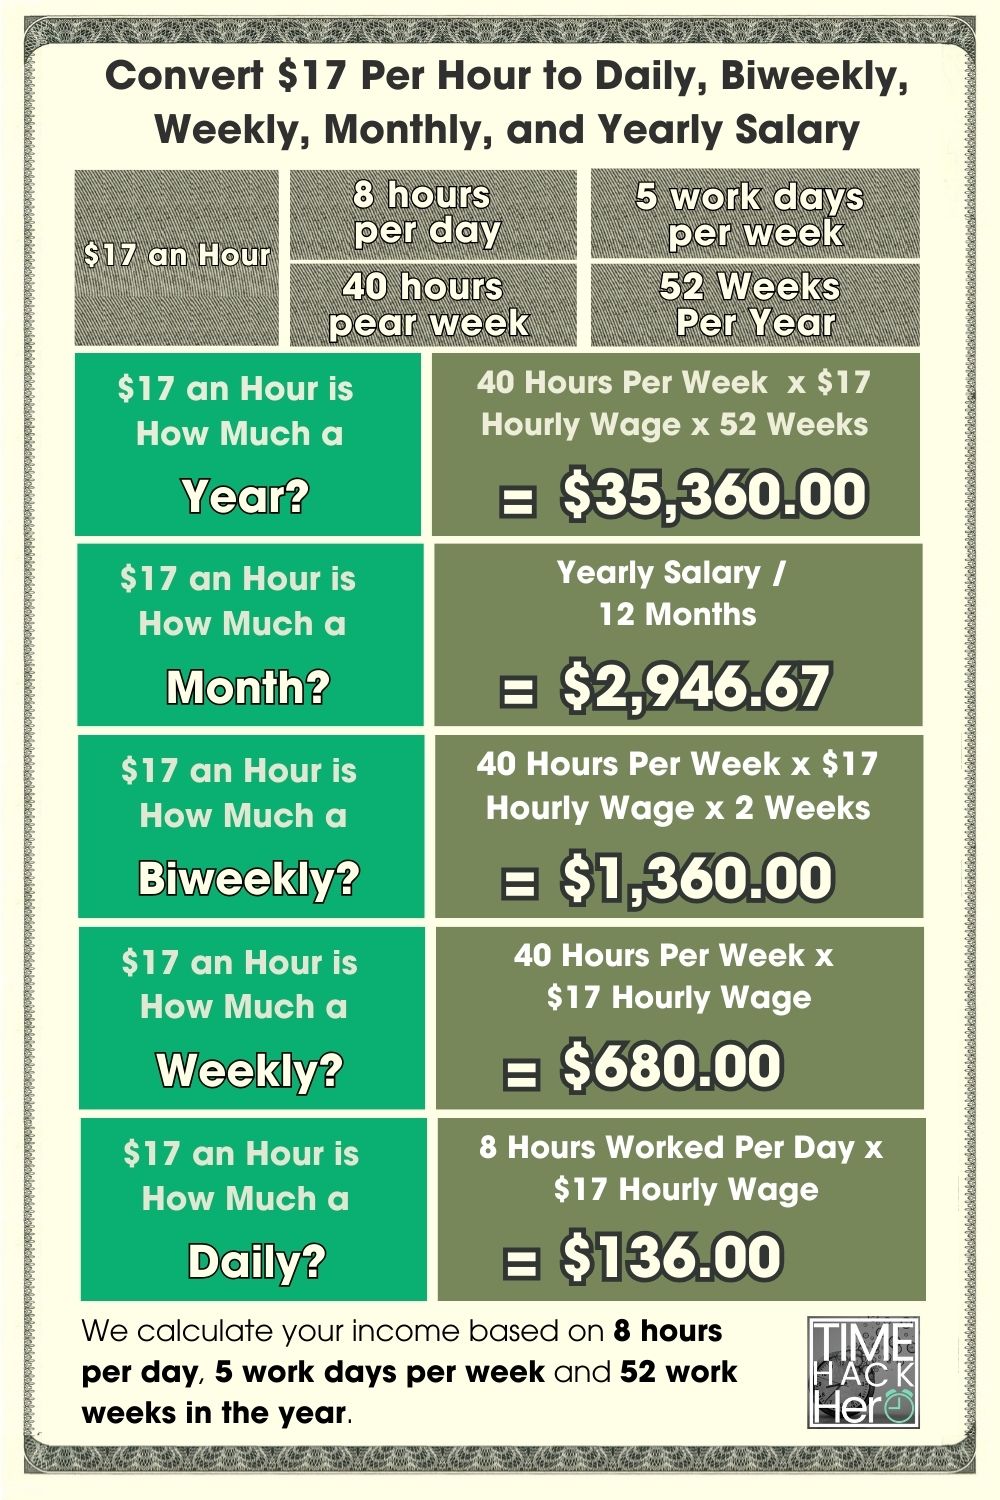 Convert $17 Per Hour to Daily, Biweekly, Weekly, Monthly, and Yearly Salary